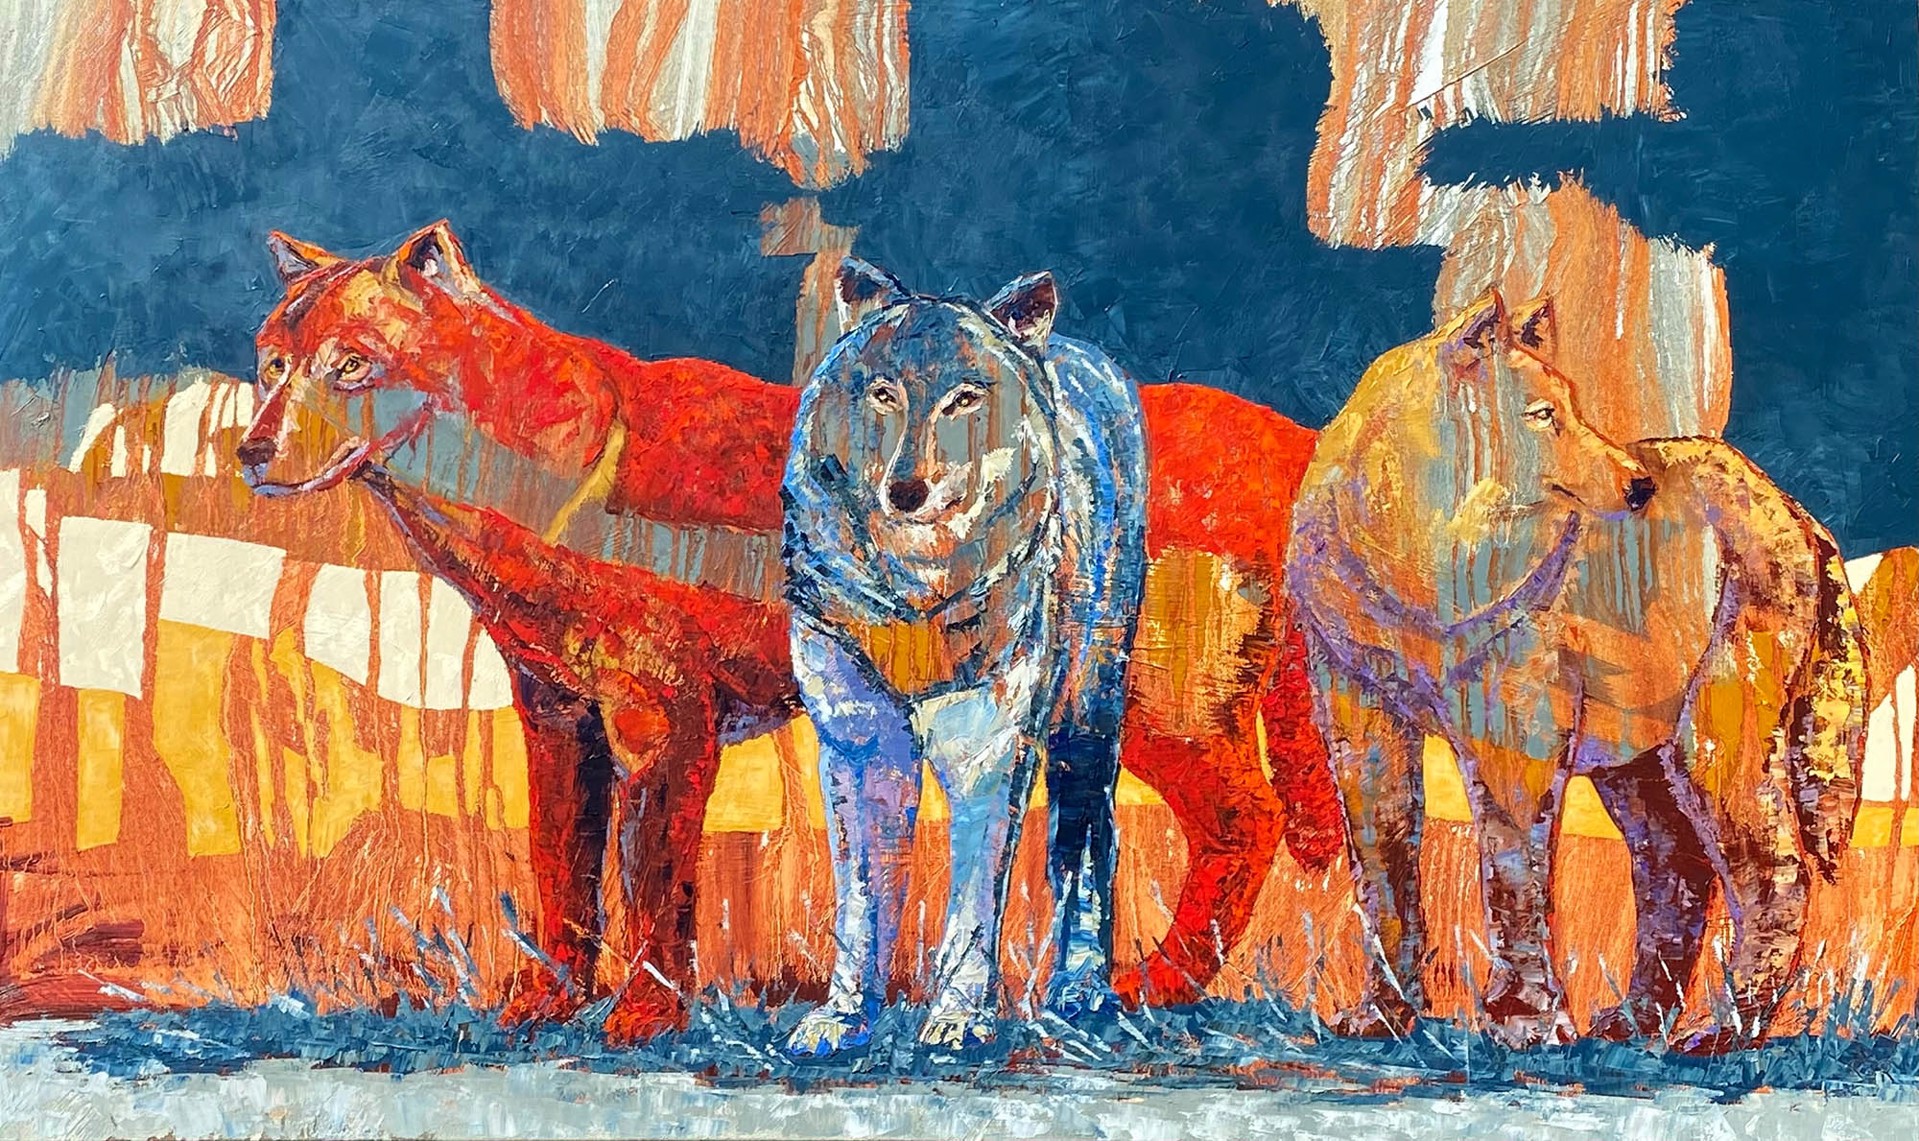 Original Oil Painting Featuring Three Multicolored Wolves Over Abstract Color Block Background In Reds Blues And Oranges